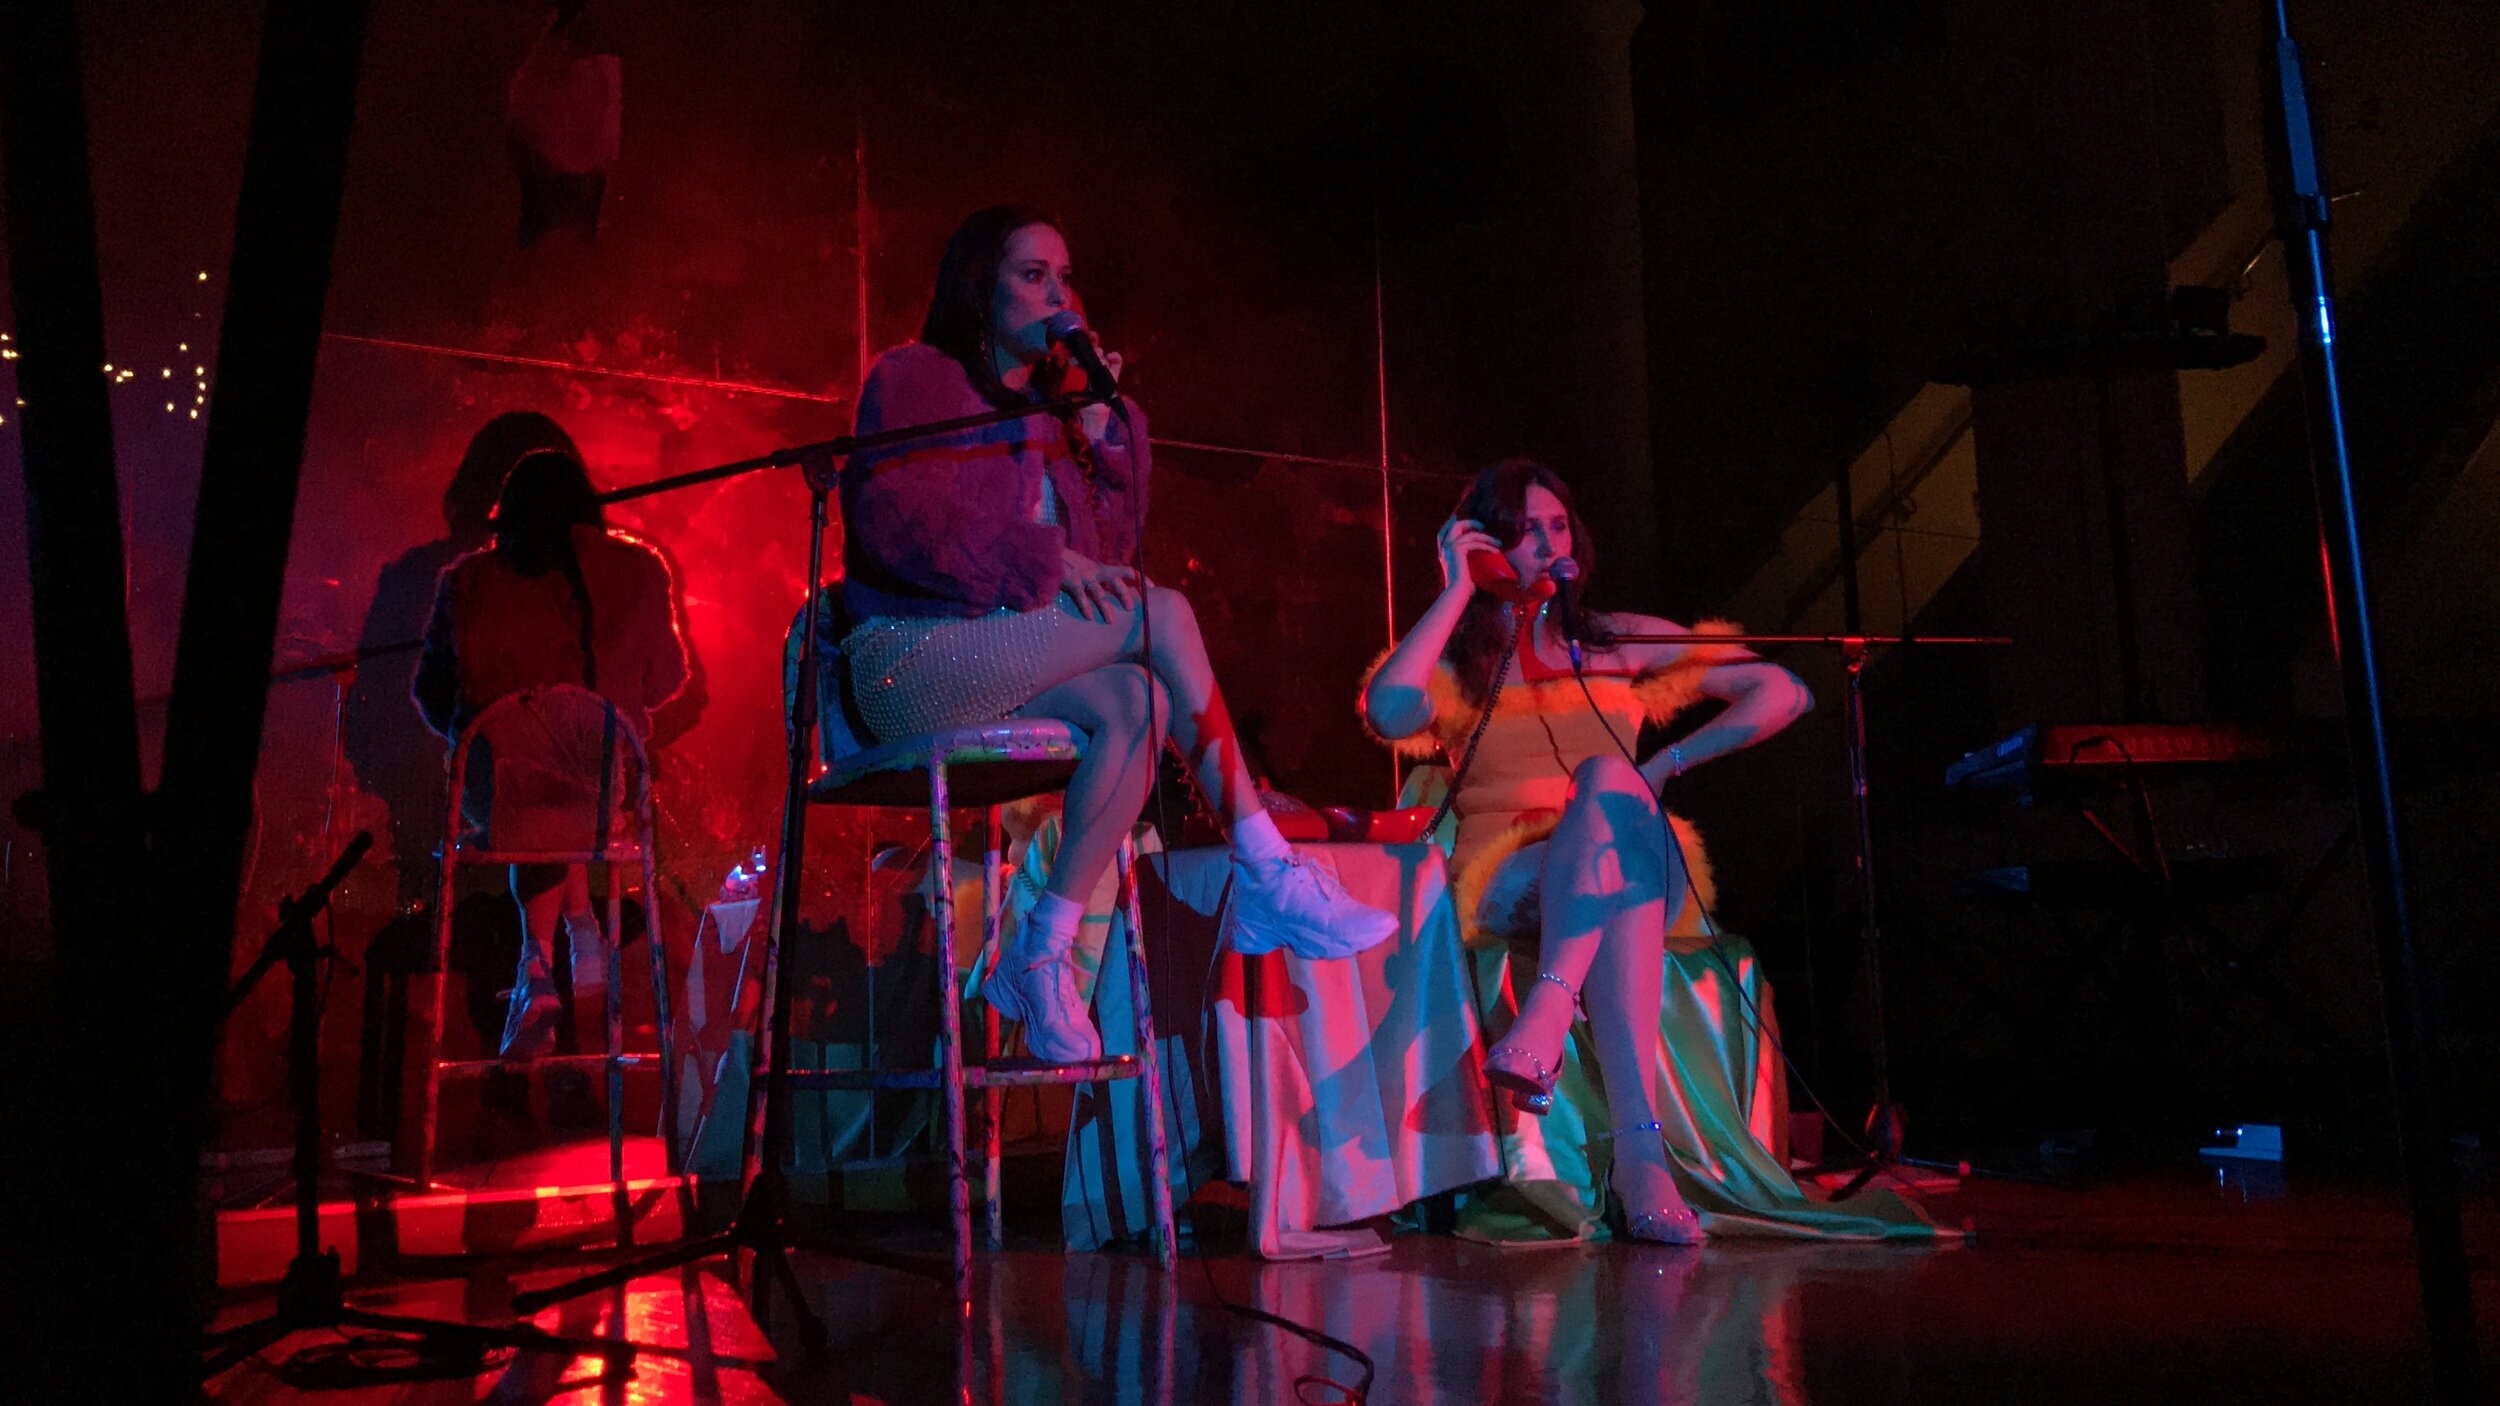 Two women sit on a stage singing while bathed in red and blue light.